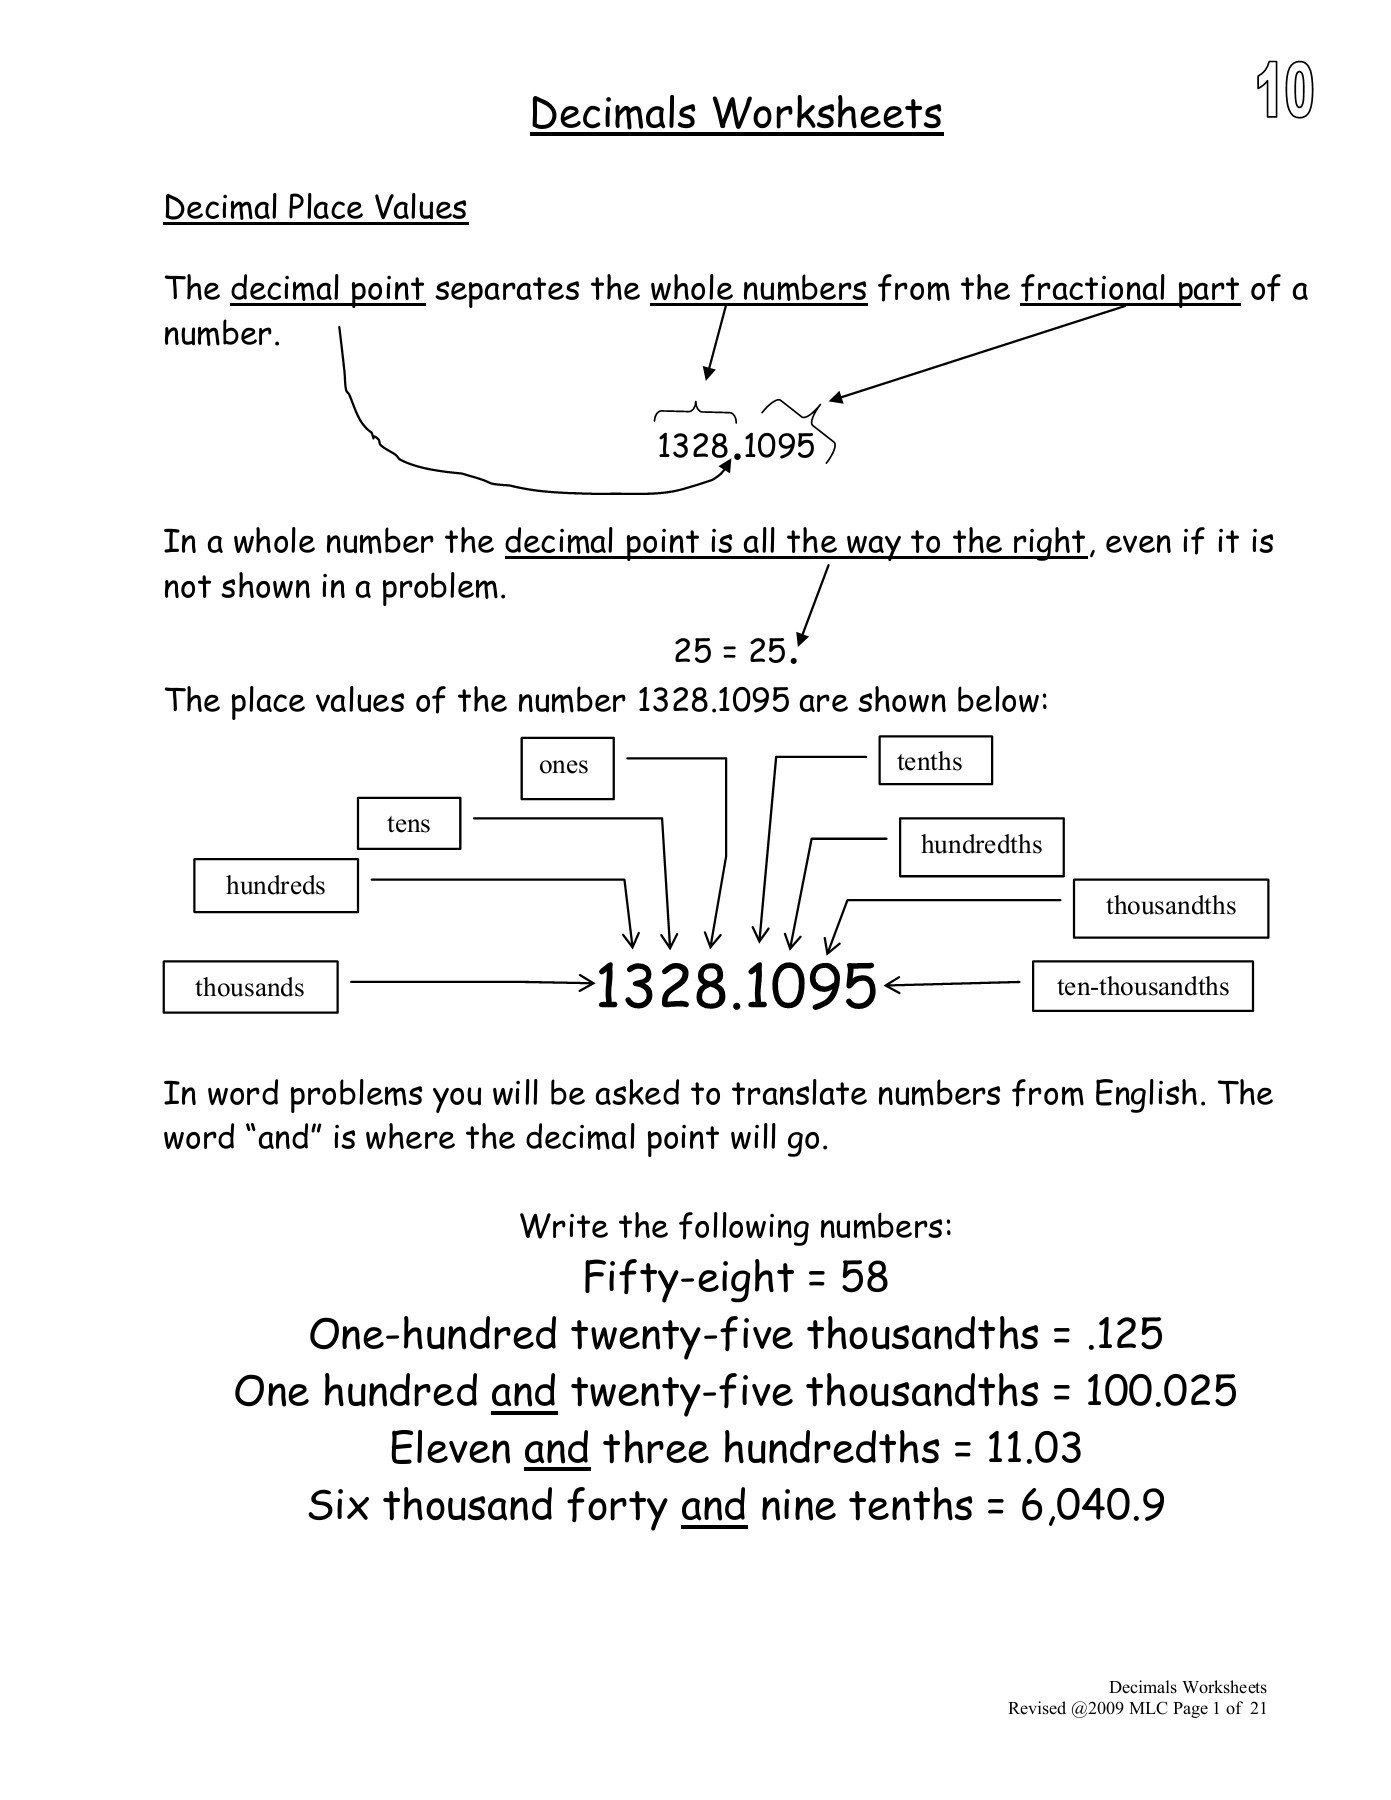 Repeating Decimals to Fractions Worksheet Decimals and Fractions Pages 1 21 Text Version